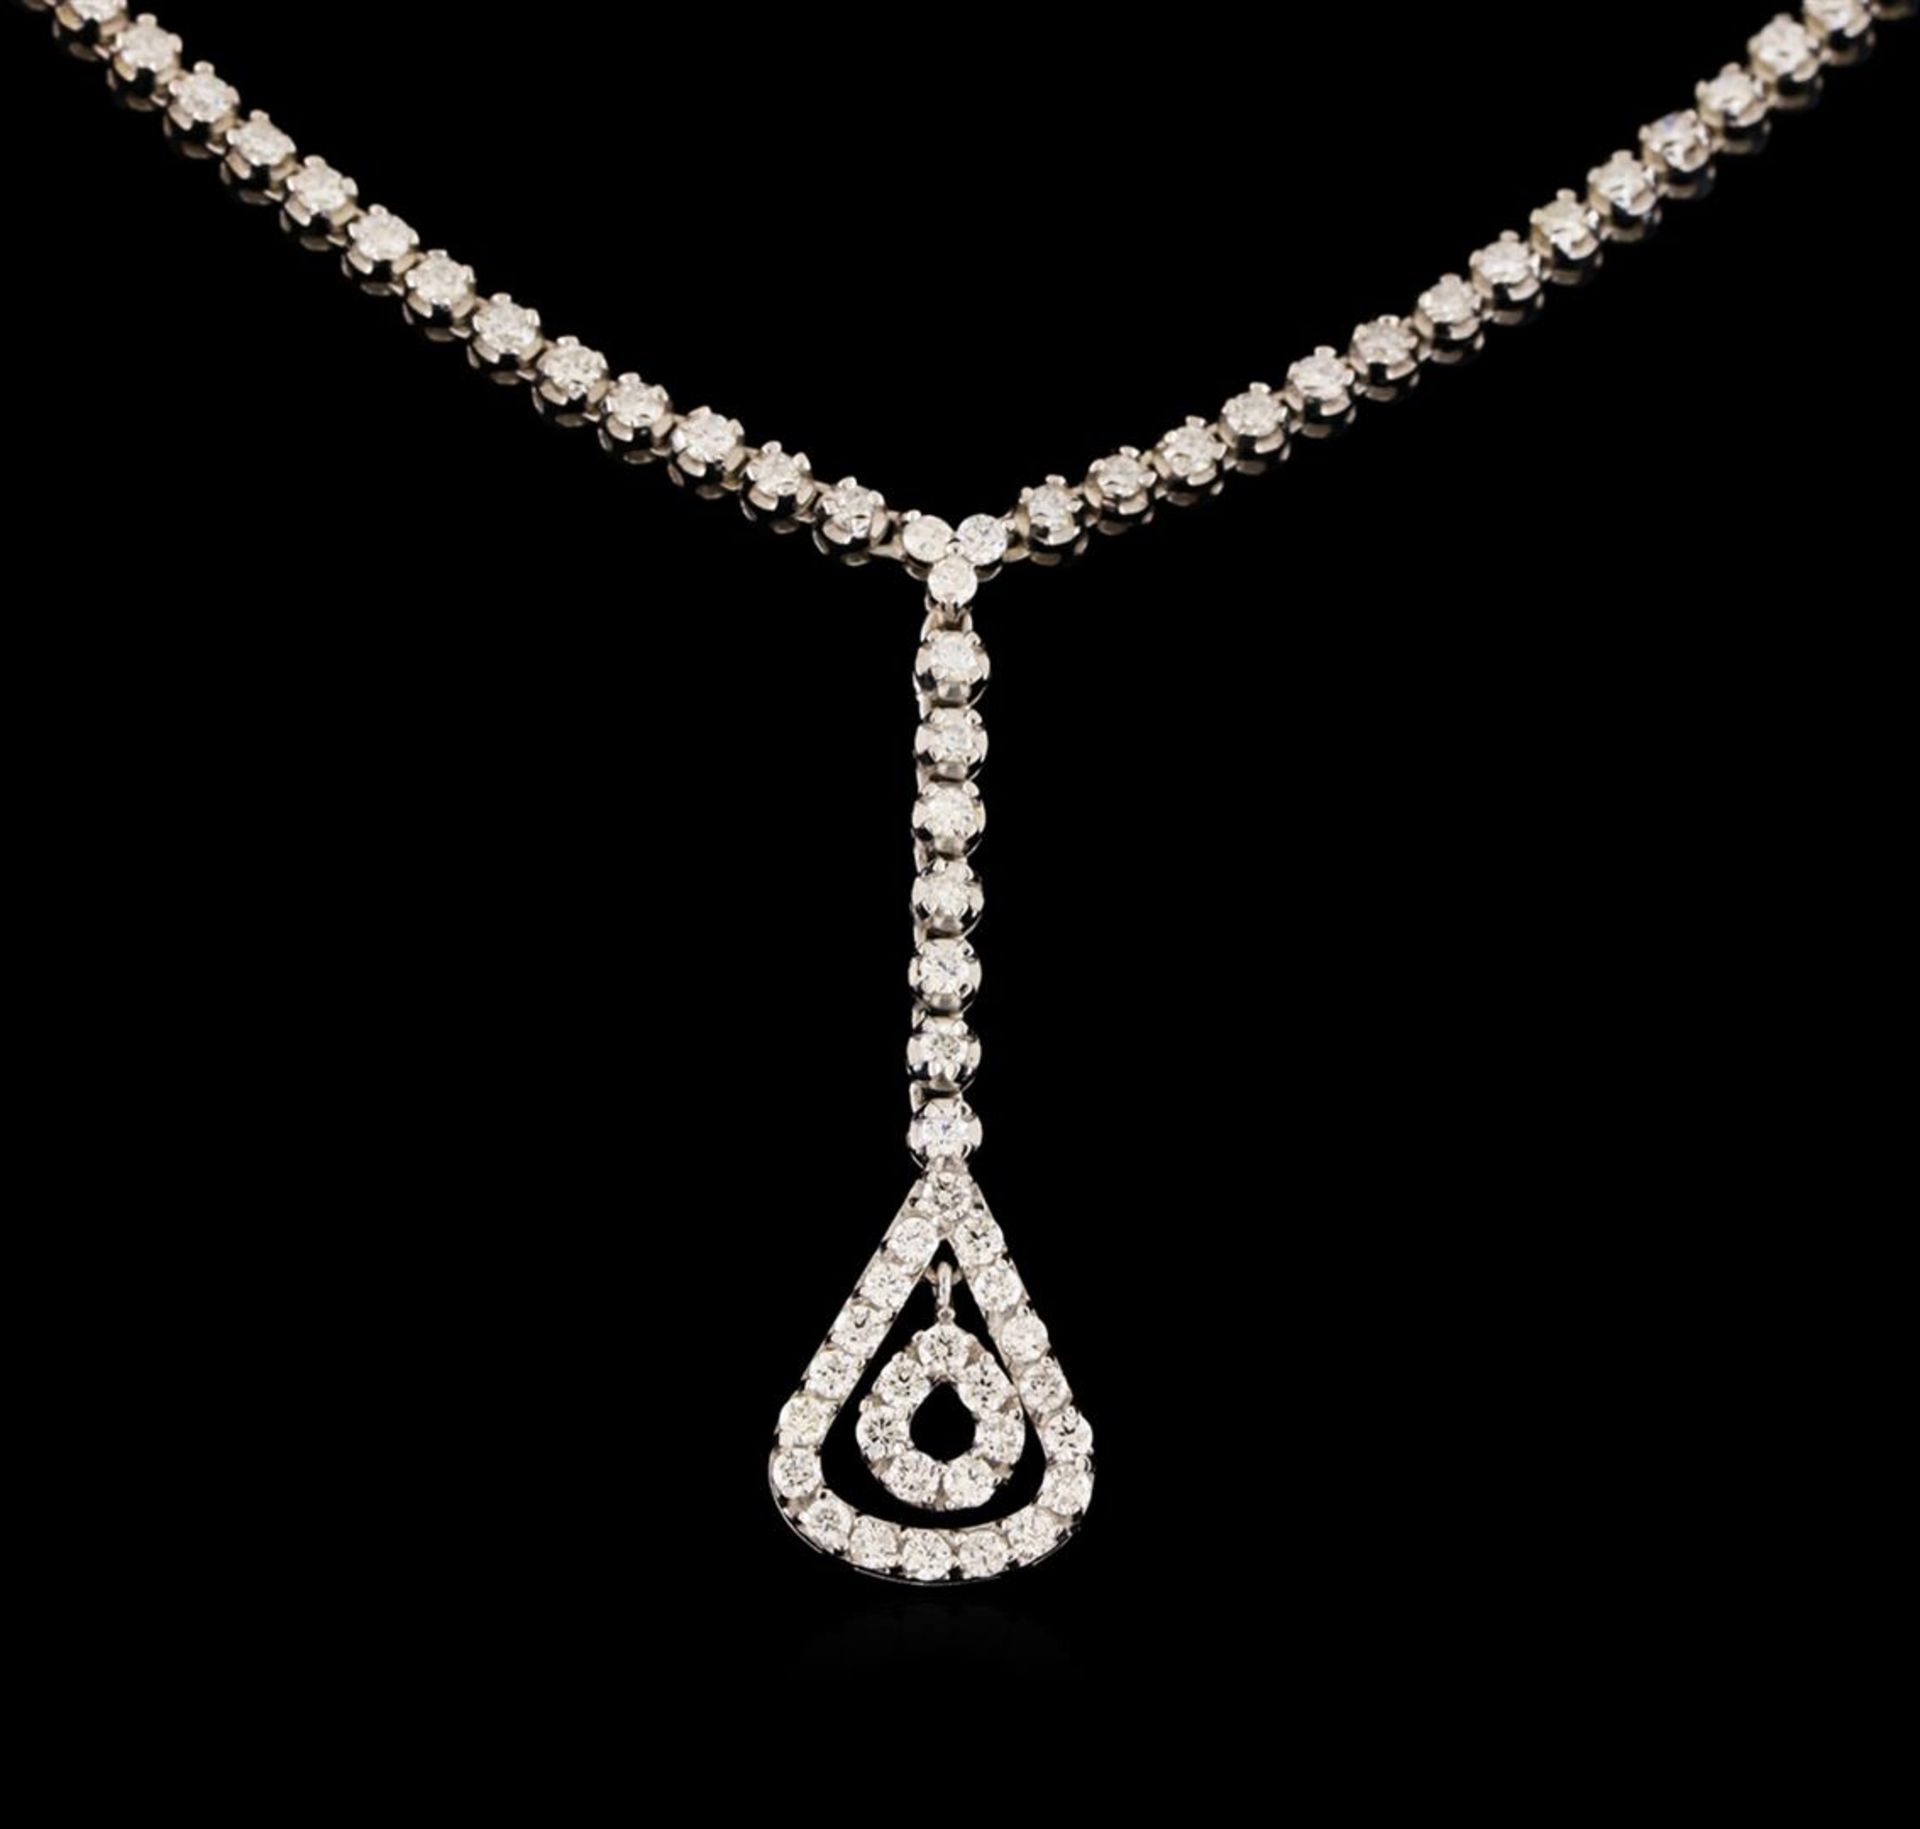 14KT White Gold 1.03 ctw Diamond Necklace - Image 2 of 3